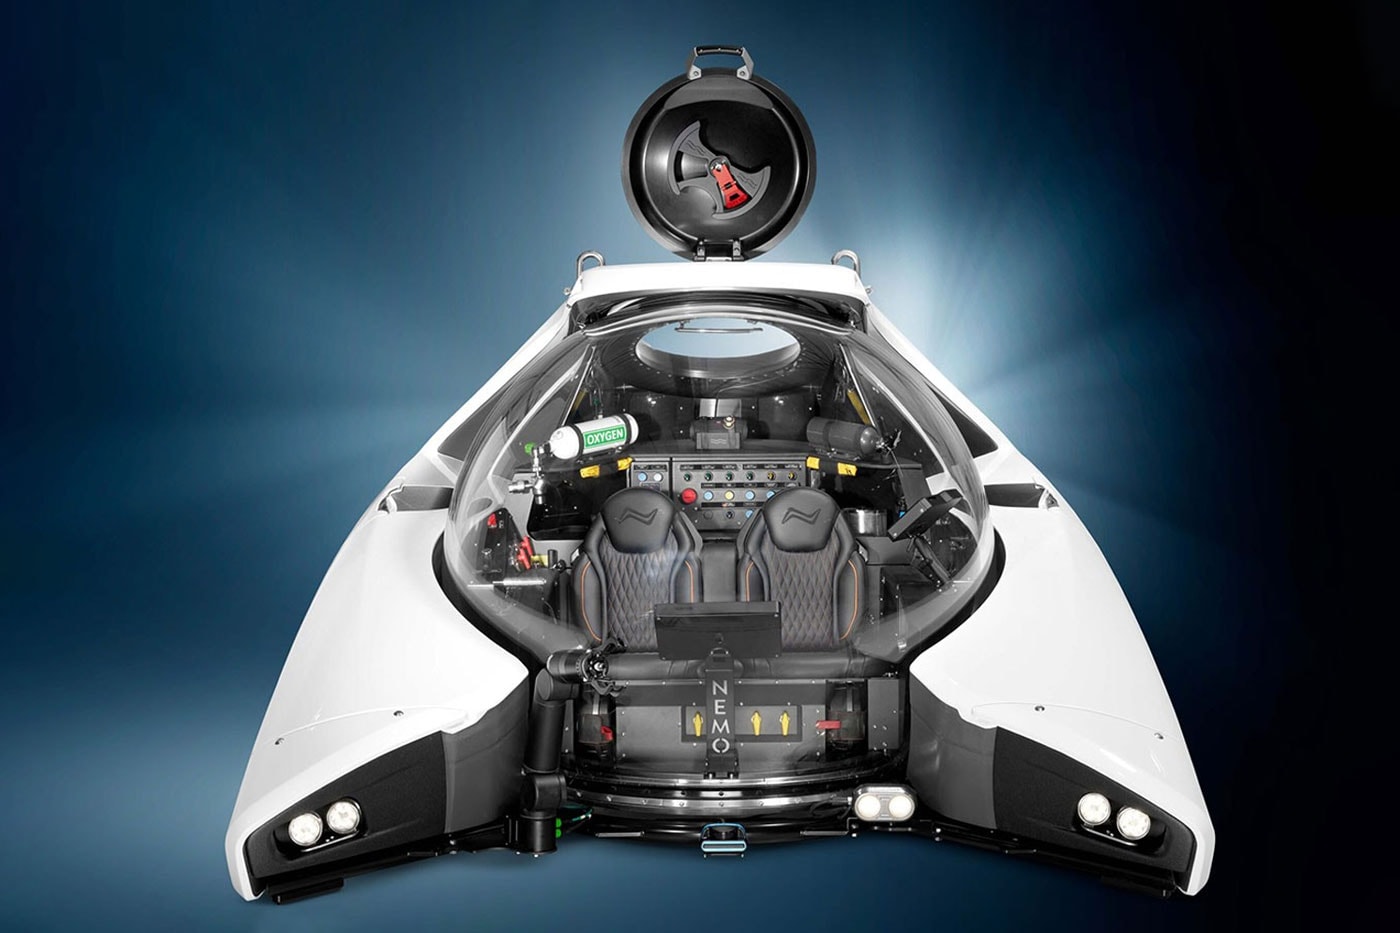 U boat worx submersibles submarine deep sea exploration 100 meter 2 seater inidividual use release info 